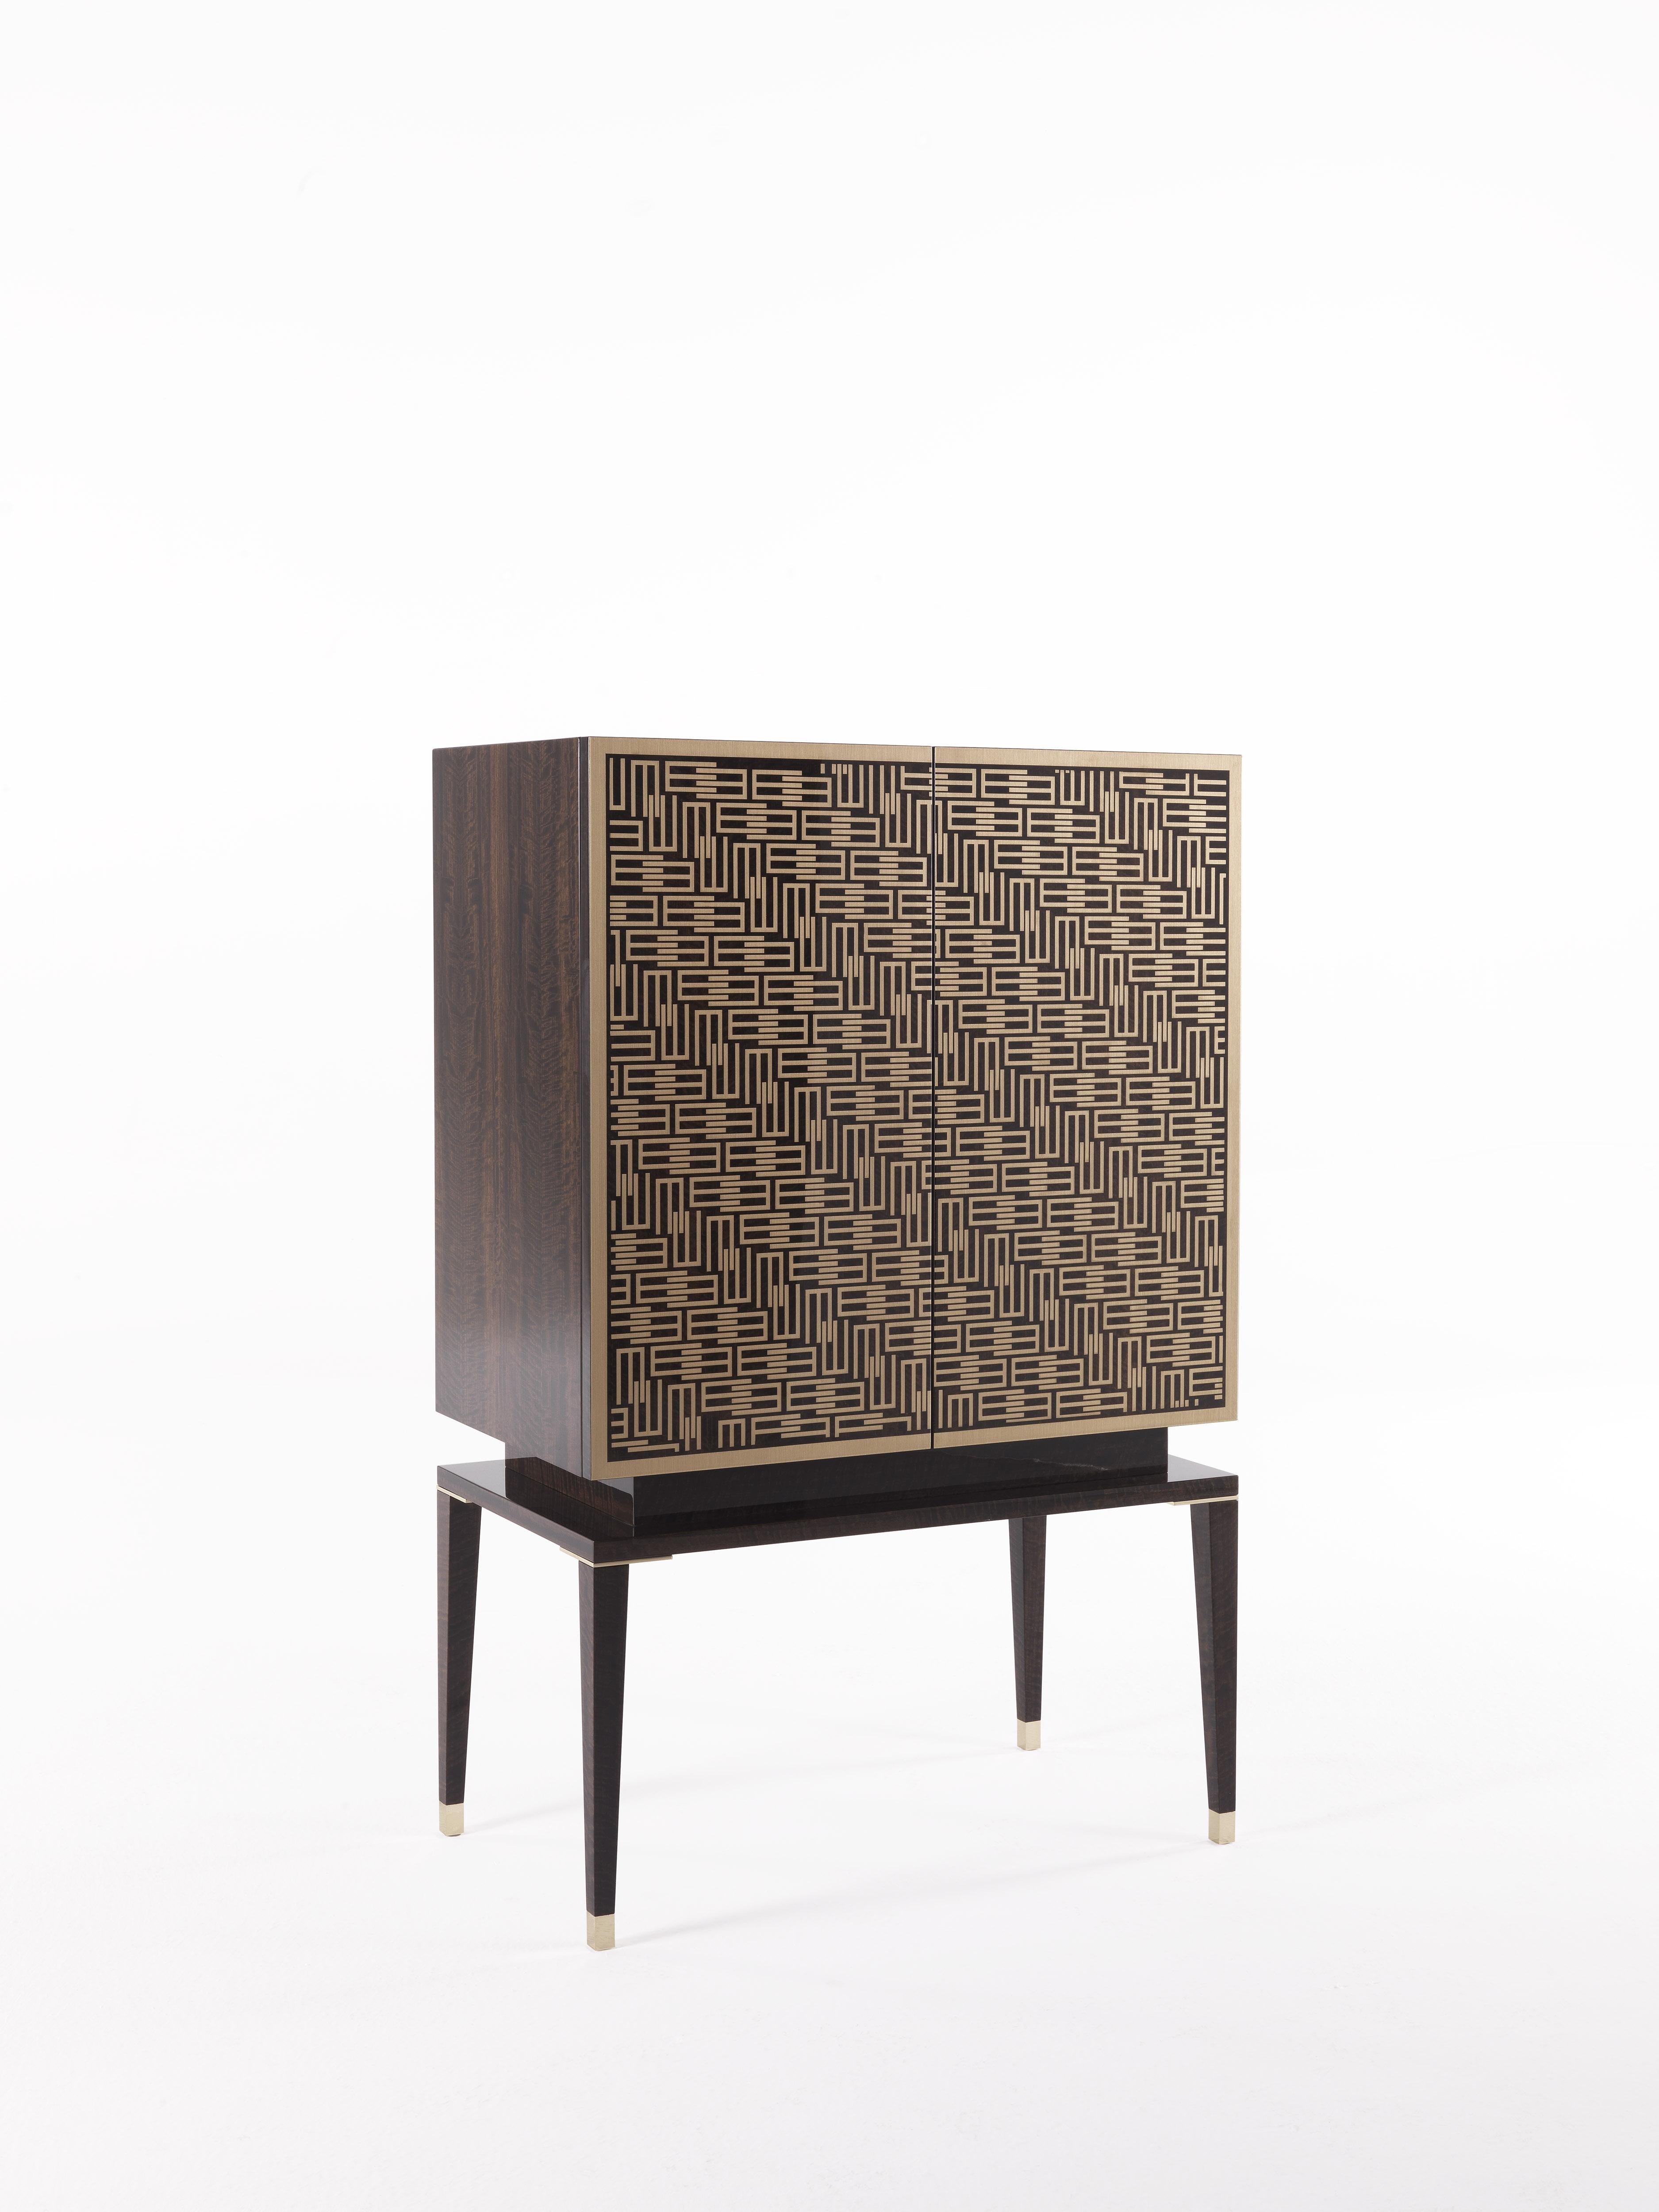 A new, deco style cabinet, characterized by precious inlays in brass with a pattern that incorporates the 